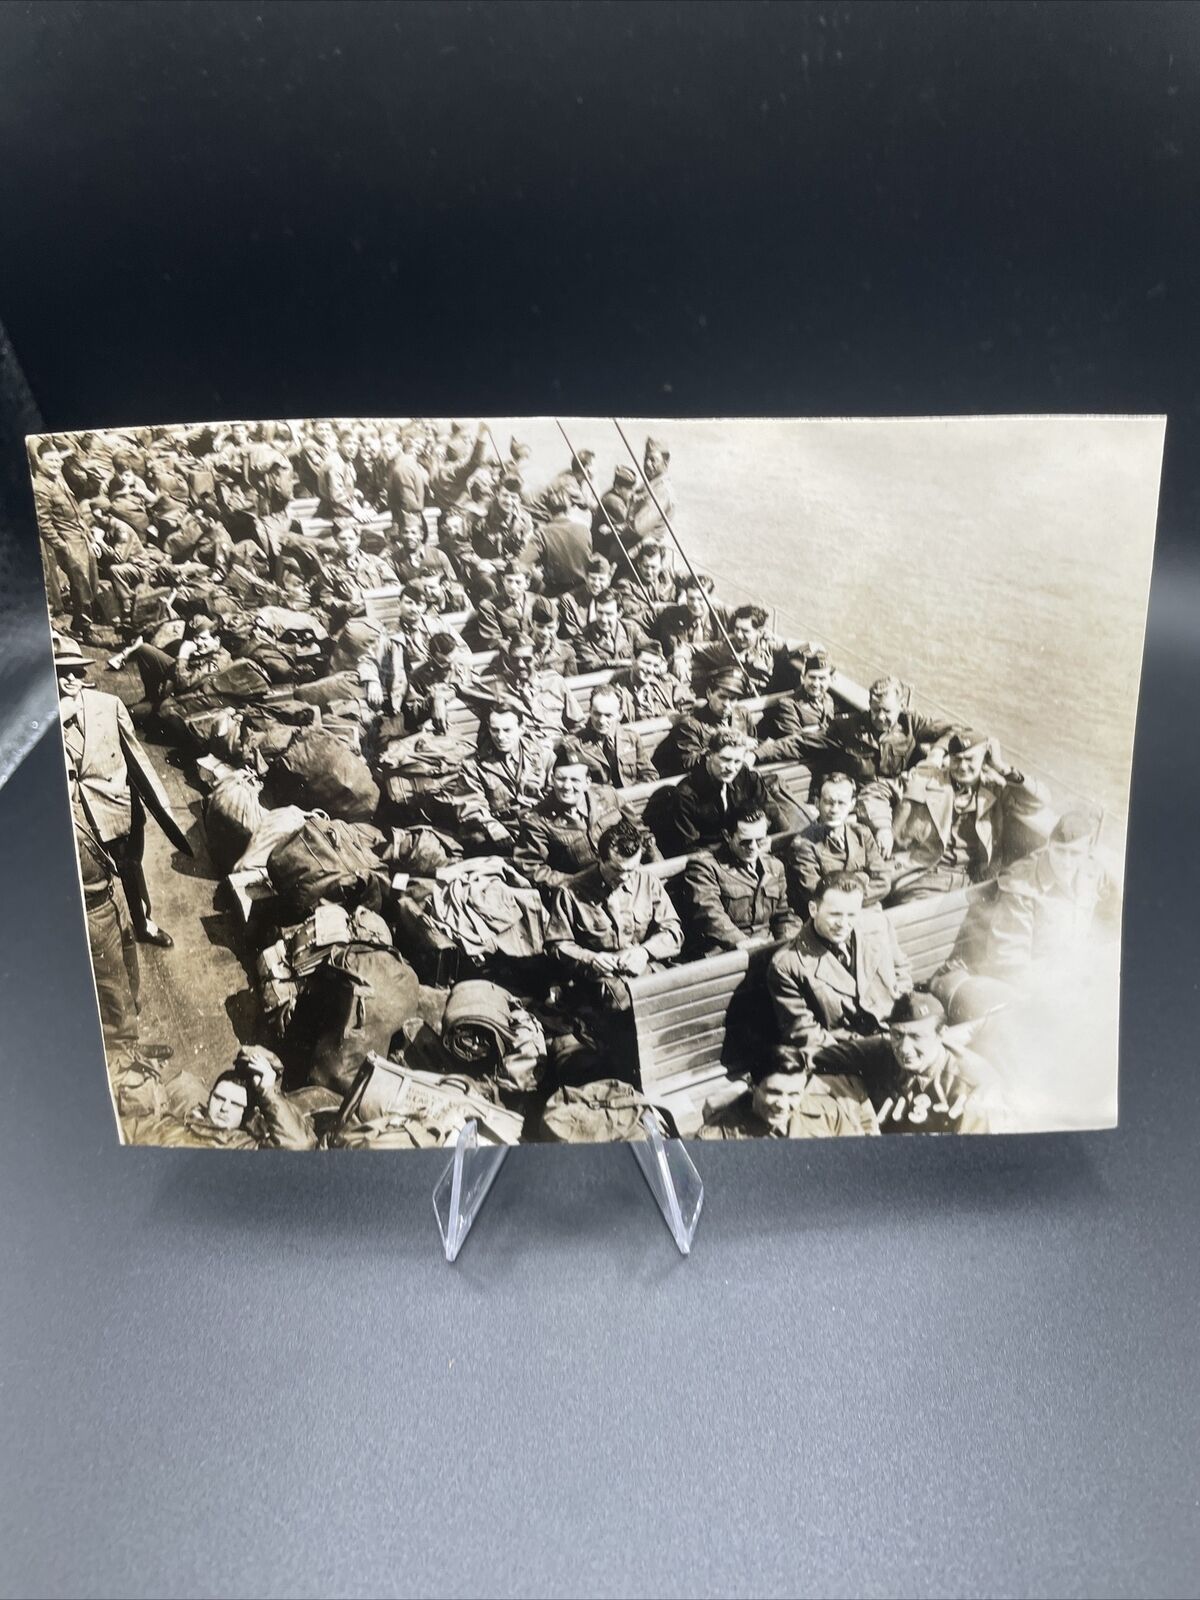 Soldiers Returning Home, San Francisco Bay, WWII Photo